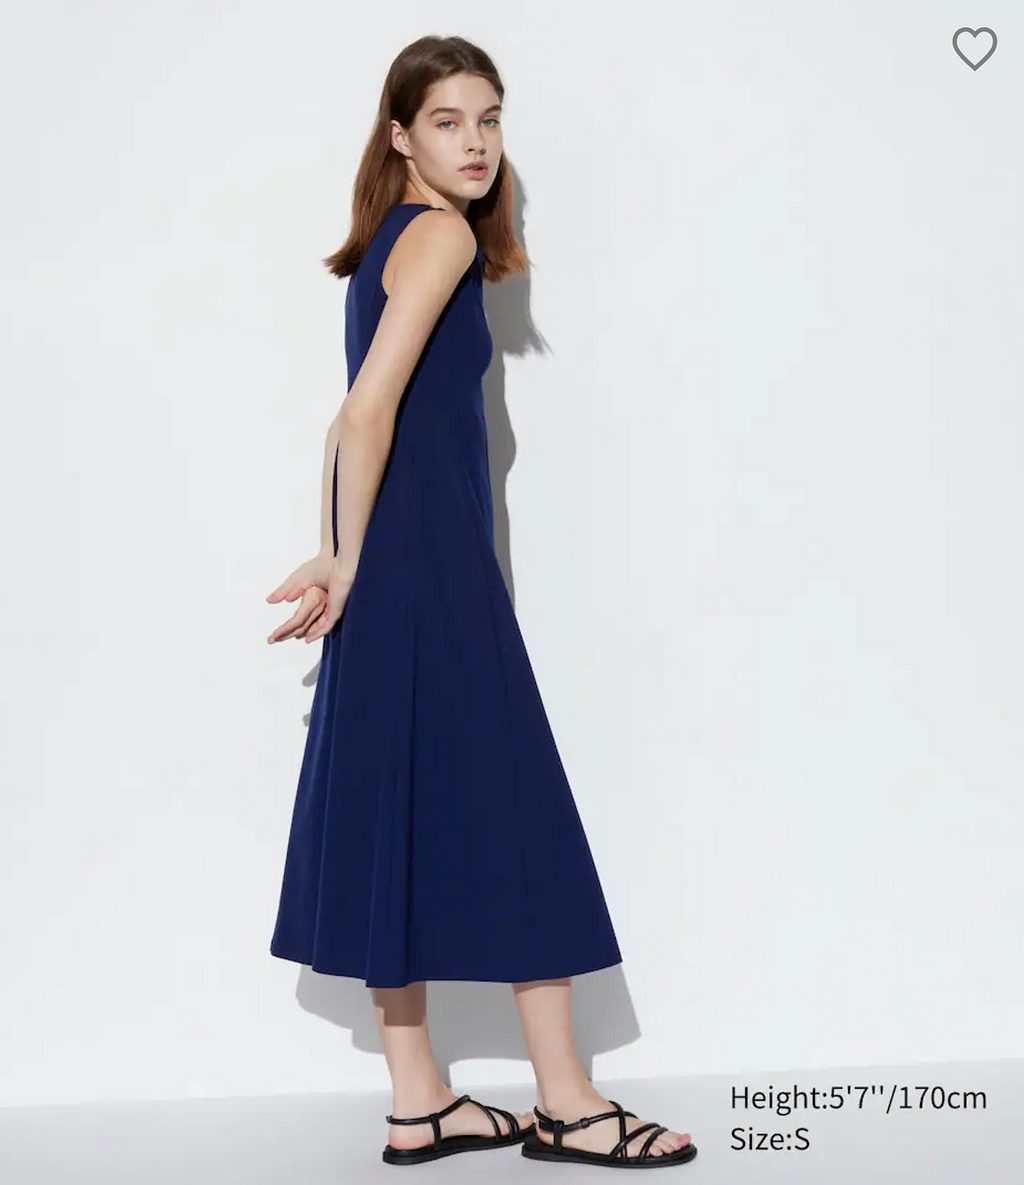 Blue sleeveless dress on a model who is skinny and 5 fit 7in not me who is fat and 5ft 4in